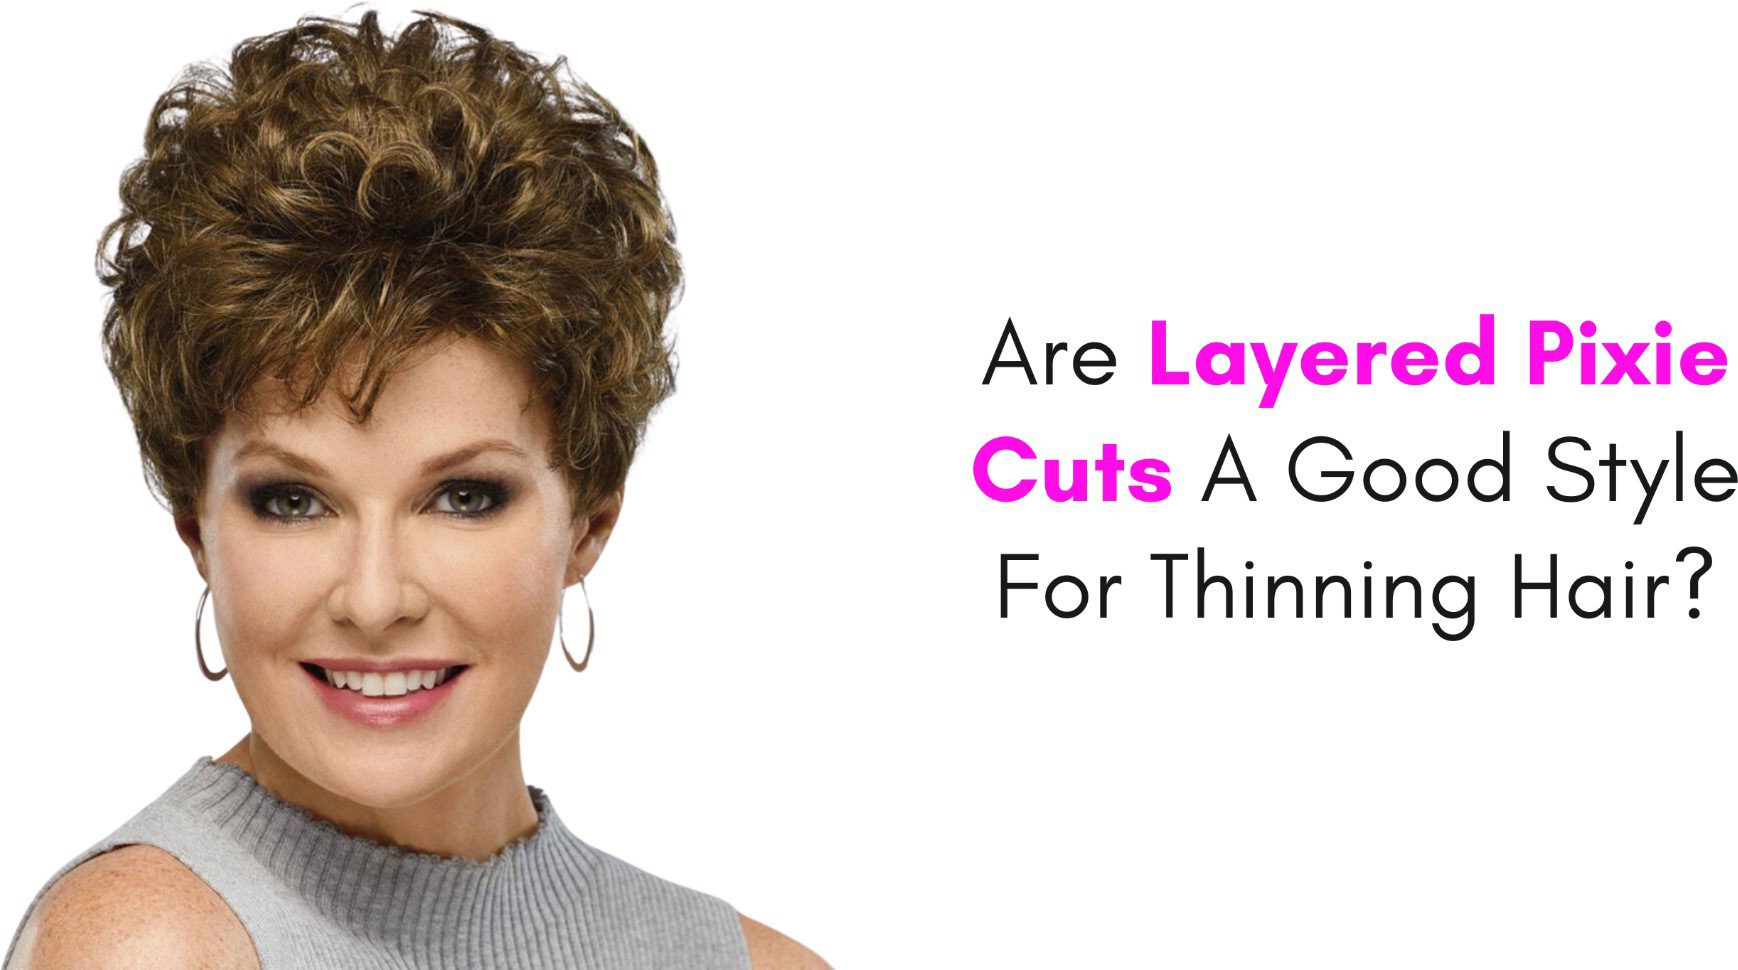 Are Layered Pixie Cuts A Good Style For Thinning Hair?